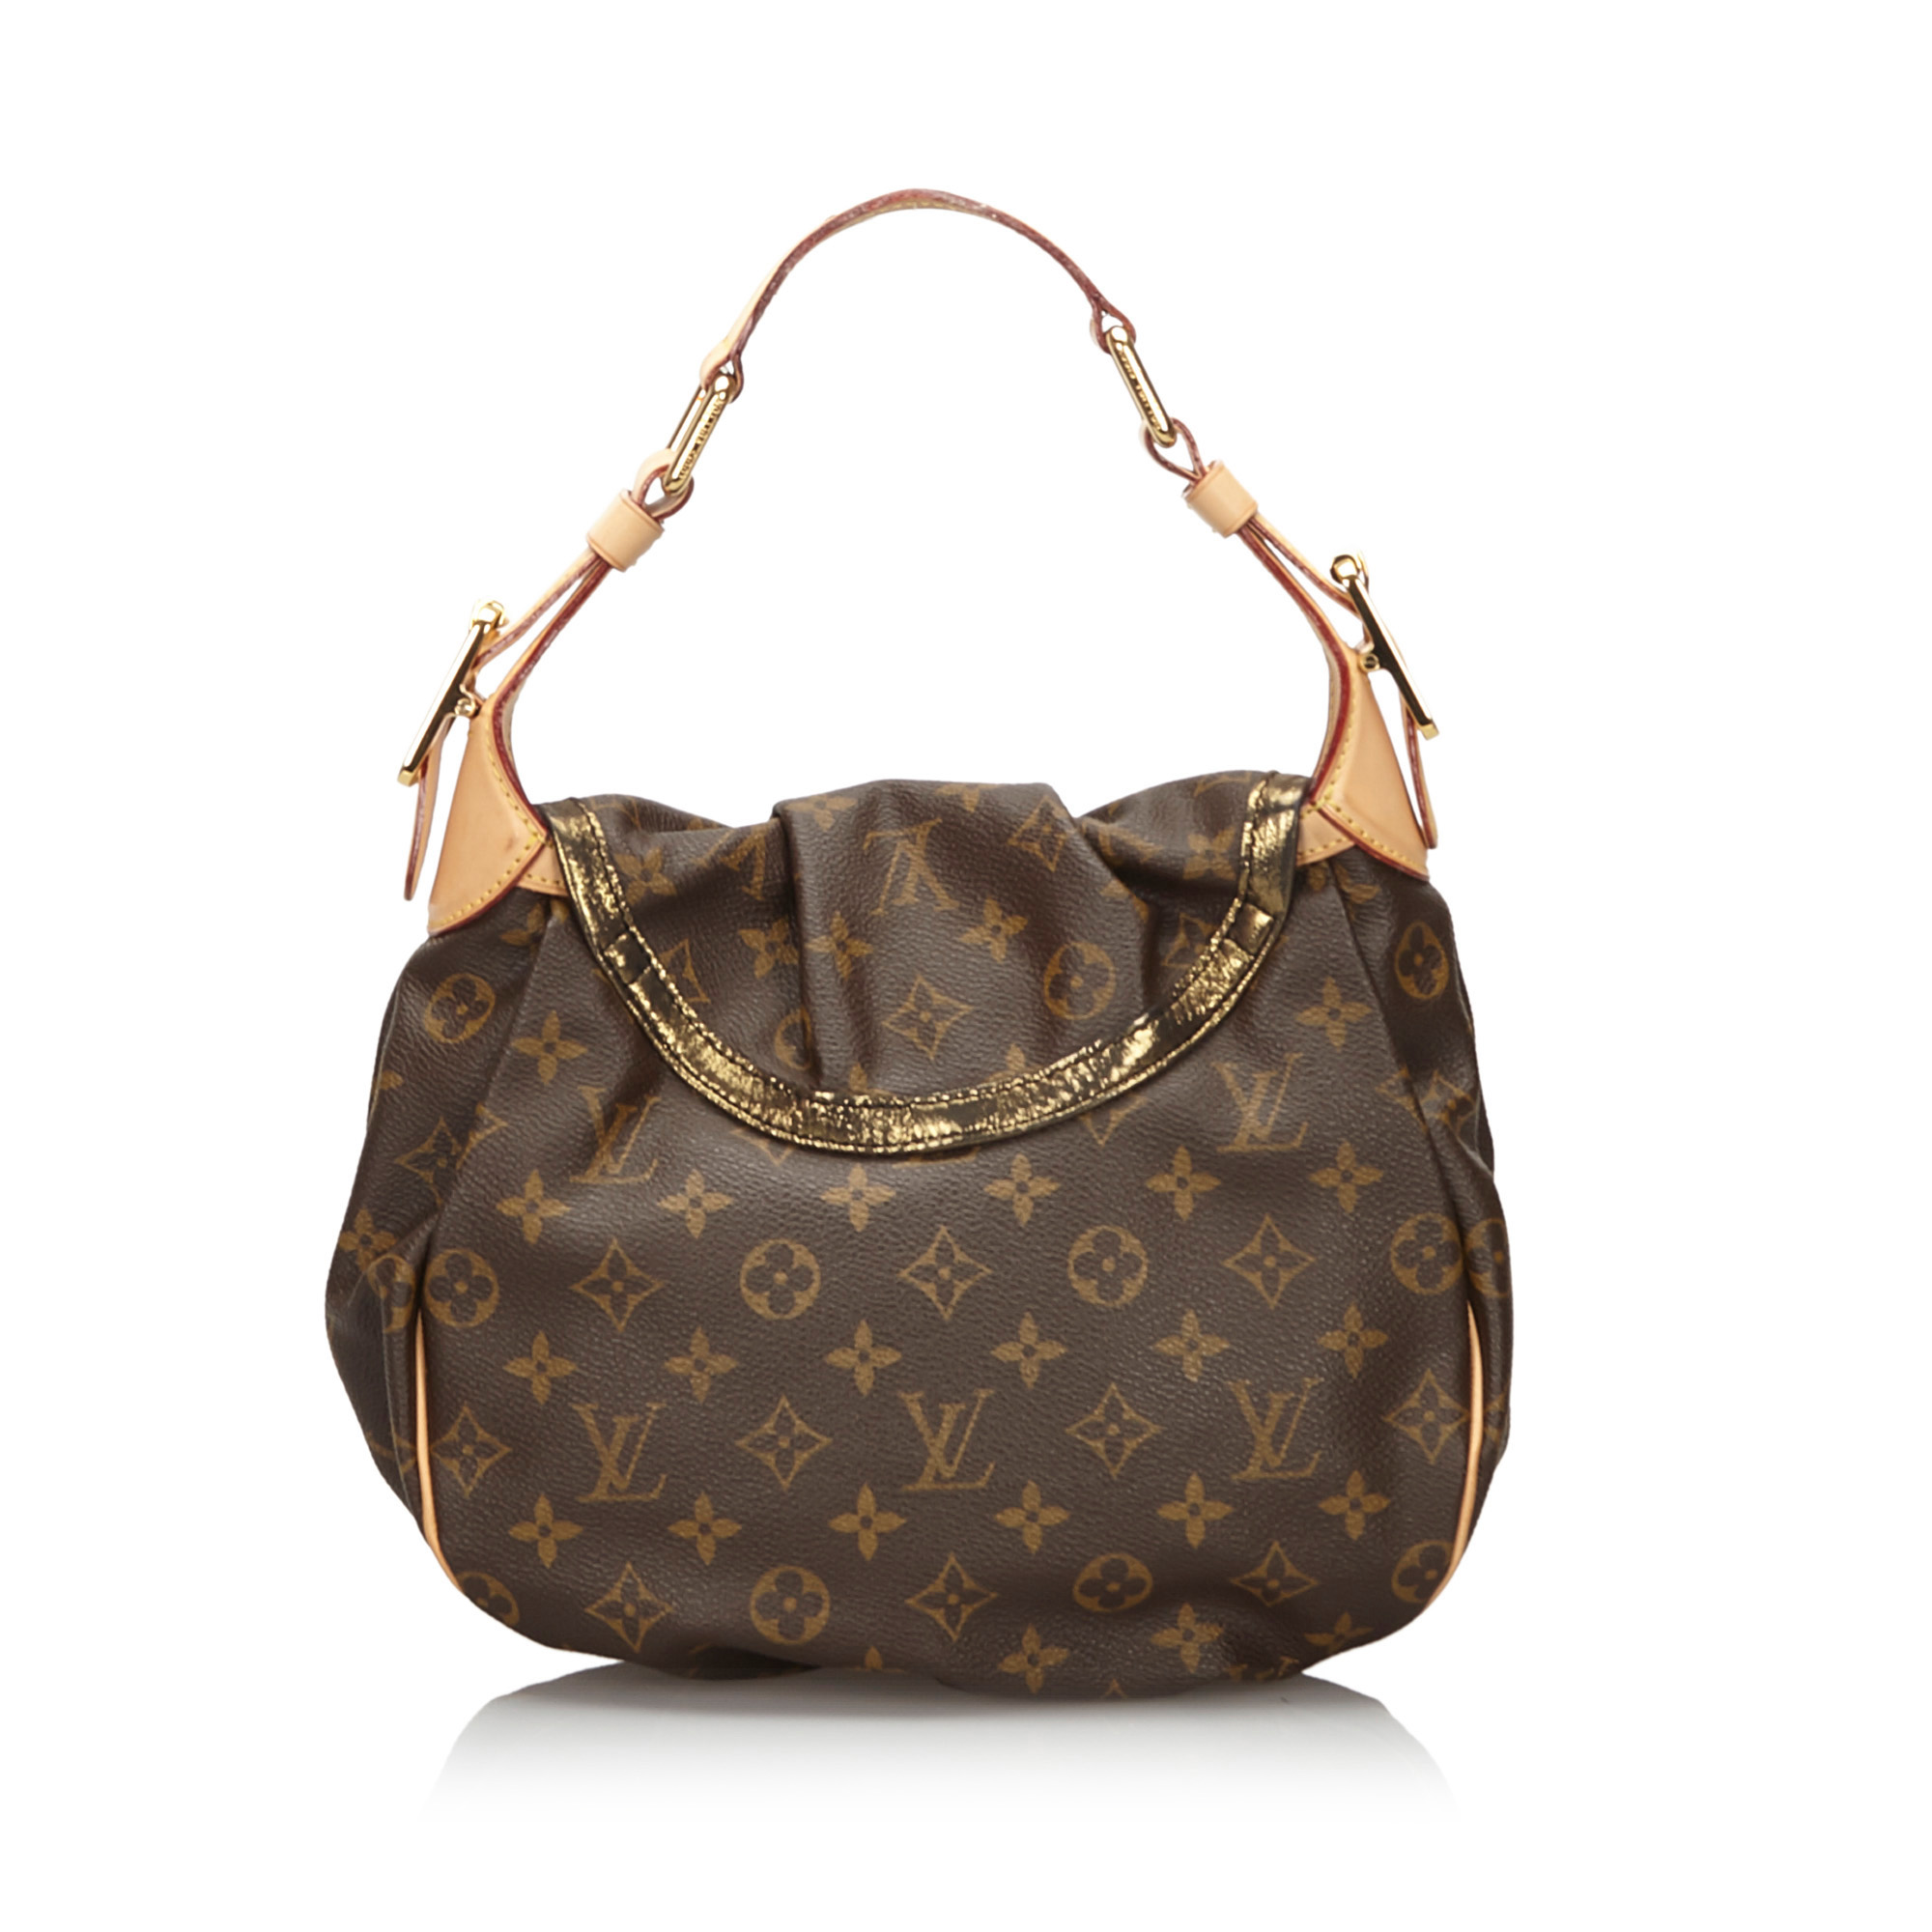 nationalsang Overfladisk Kammer Louis Vuitton Monogram Canvas Limited Edition Kalahari PM Bag, Brown - buy  at the price of $1,558.31 in theluxurycloset.com | imall.com